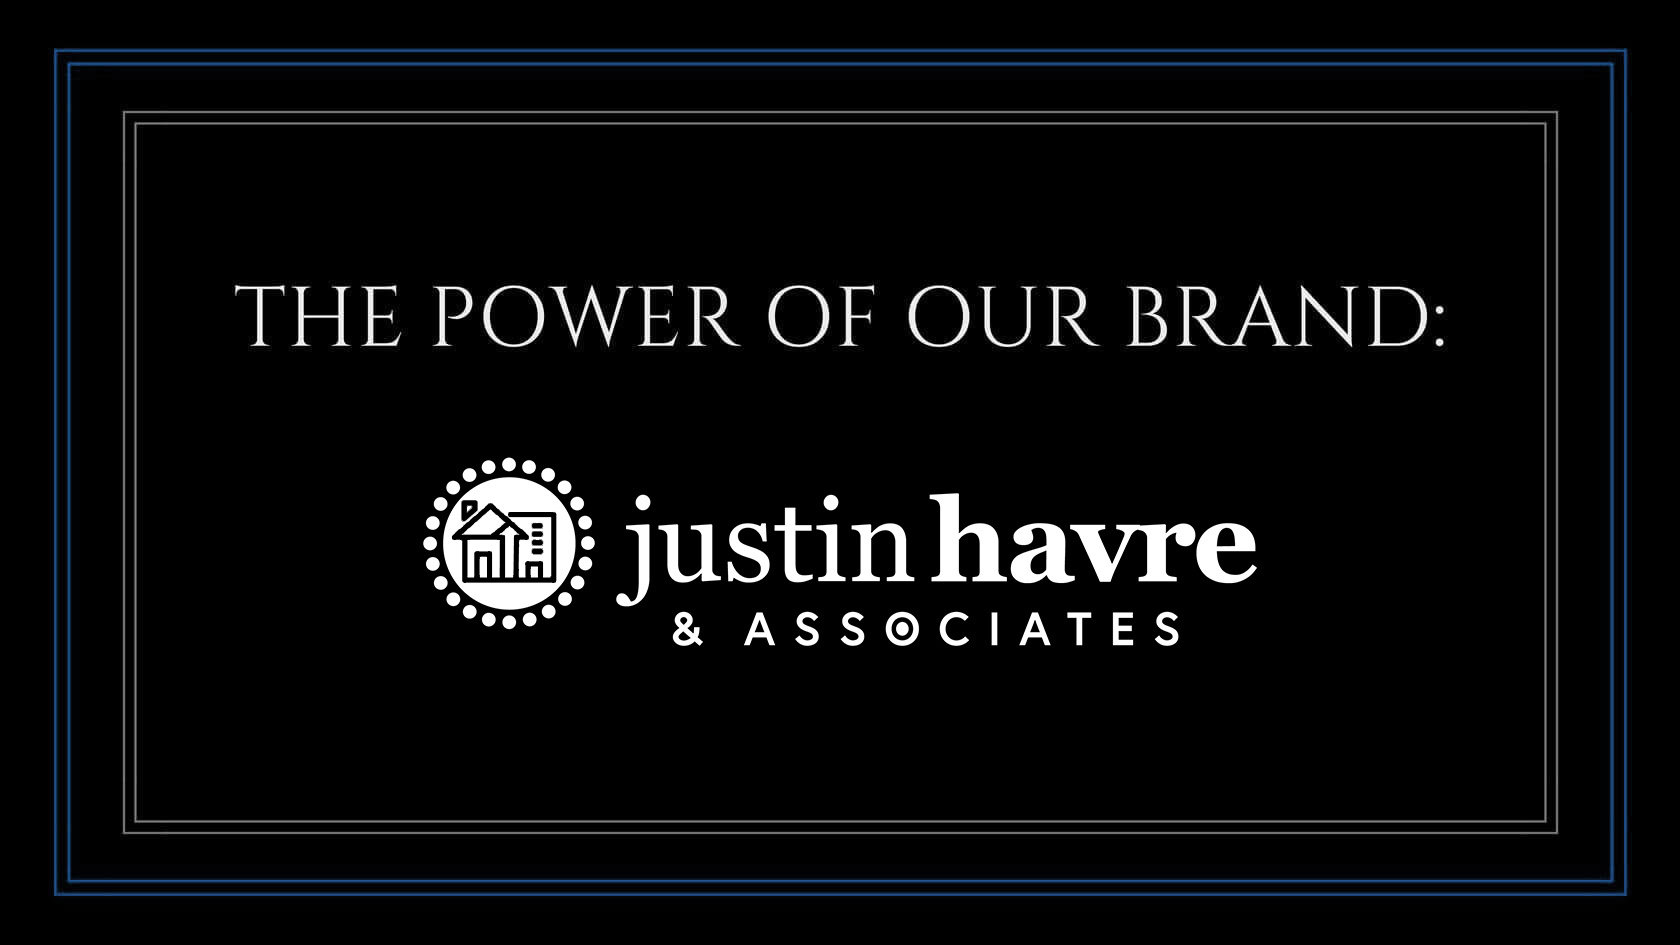 The Power of Our Brand: Justin Havre of RE/MAX First